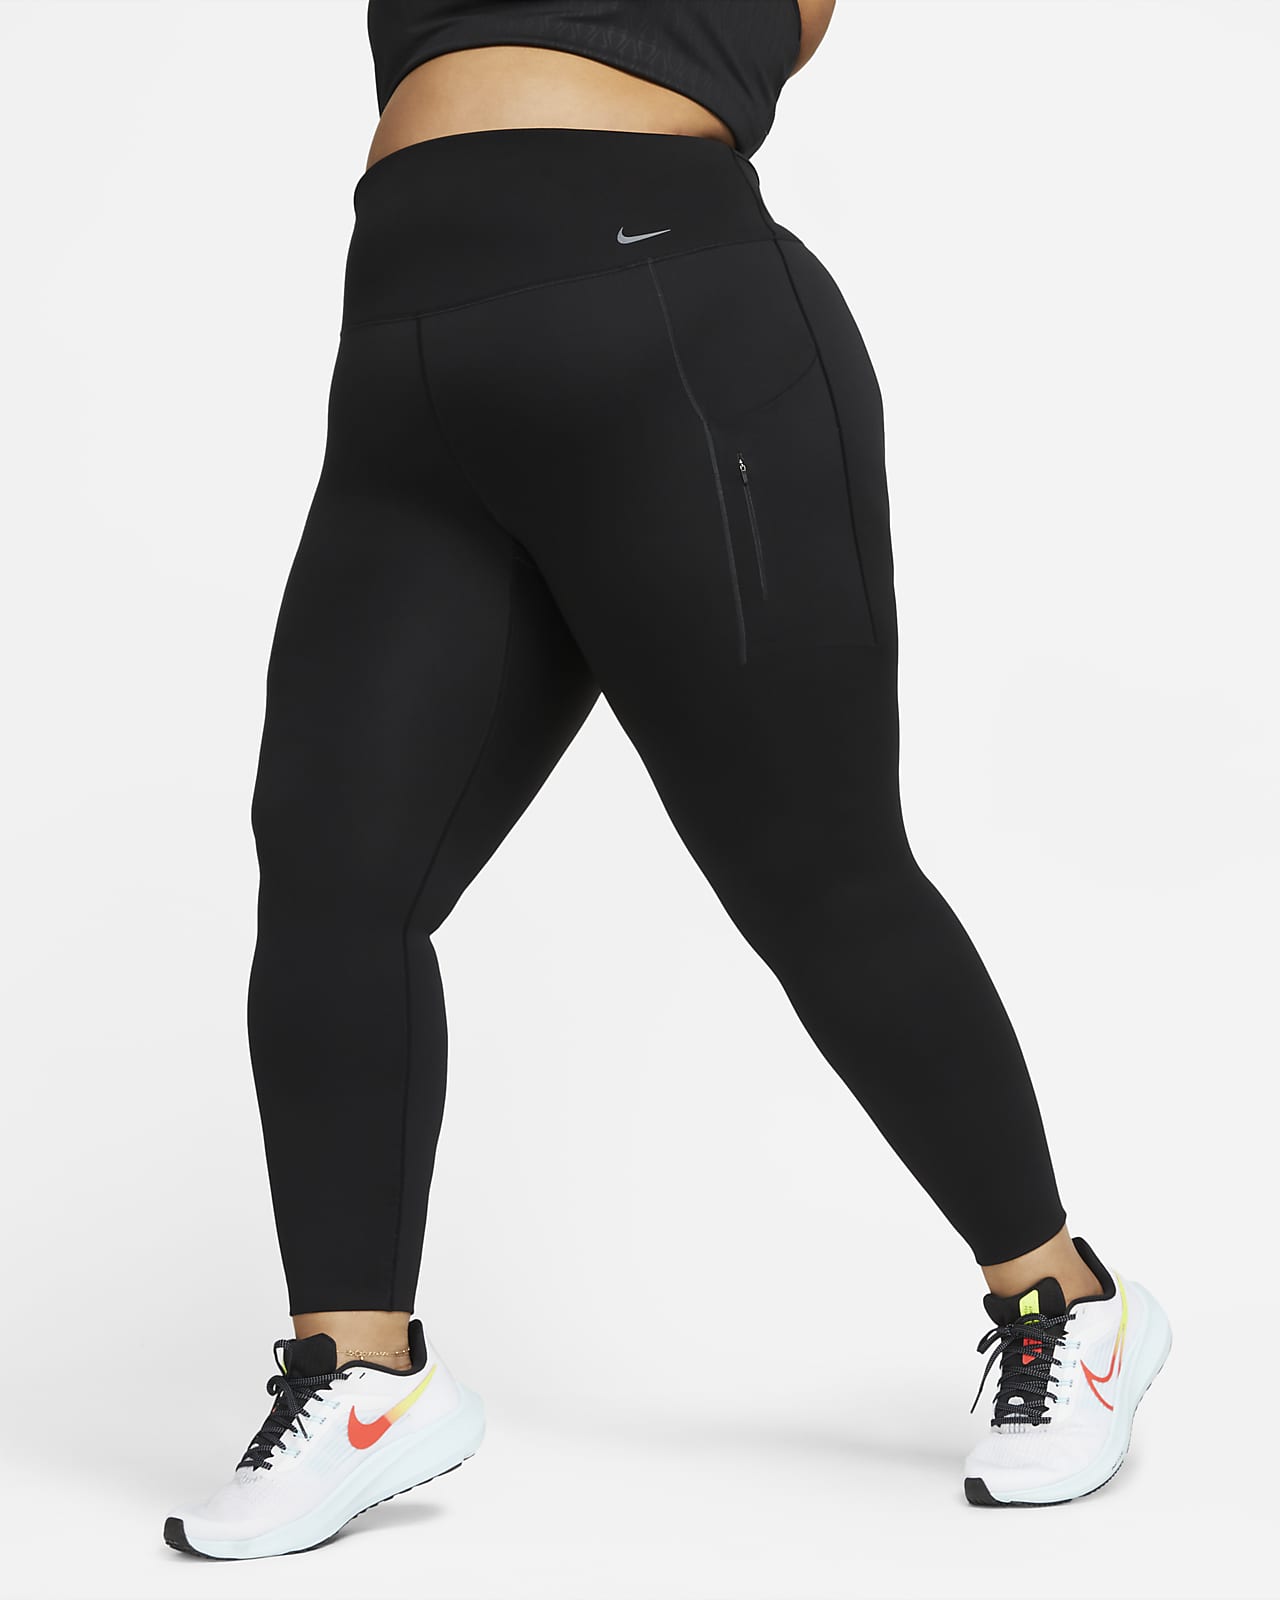 Workout Leggings for Womens with Pockets High Waisted Compression